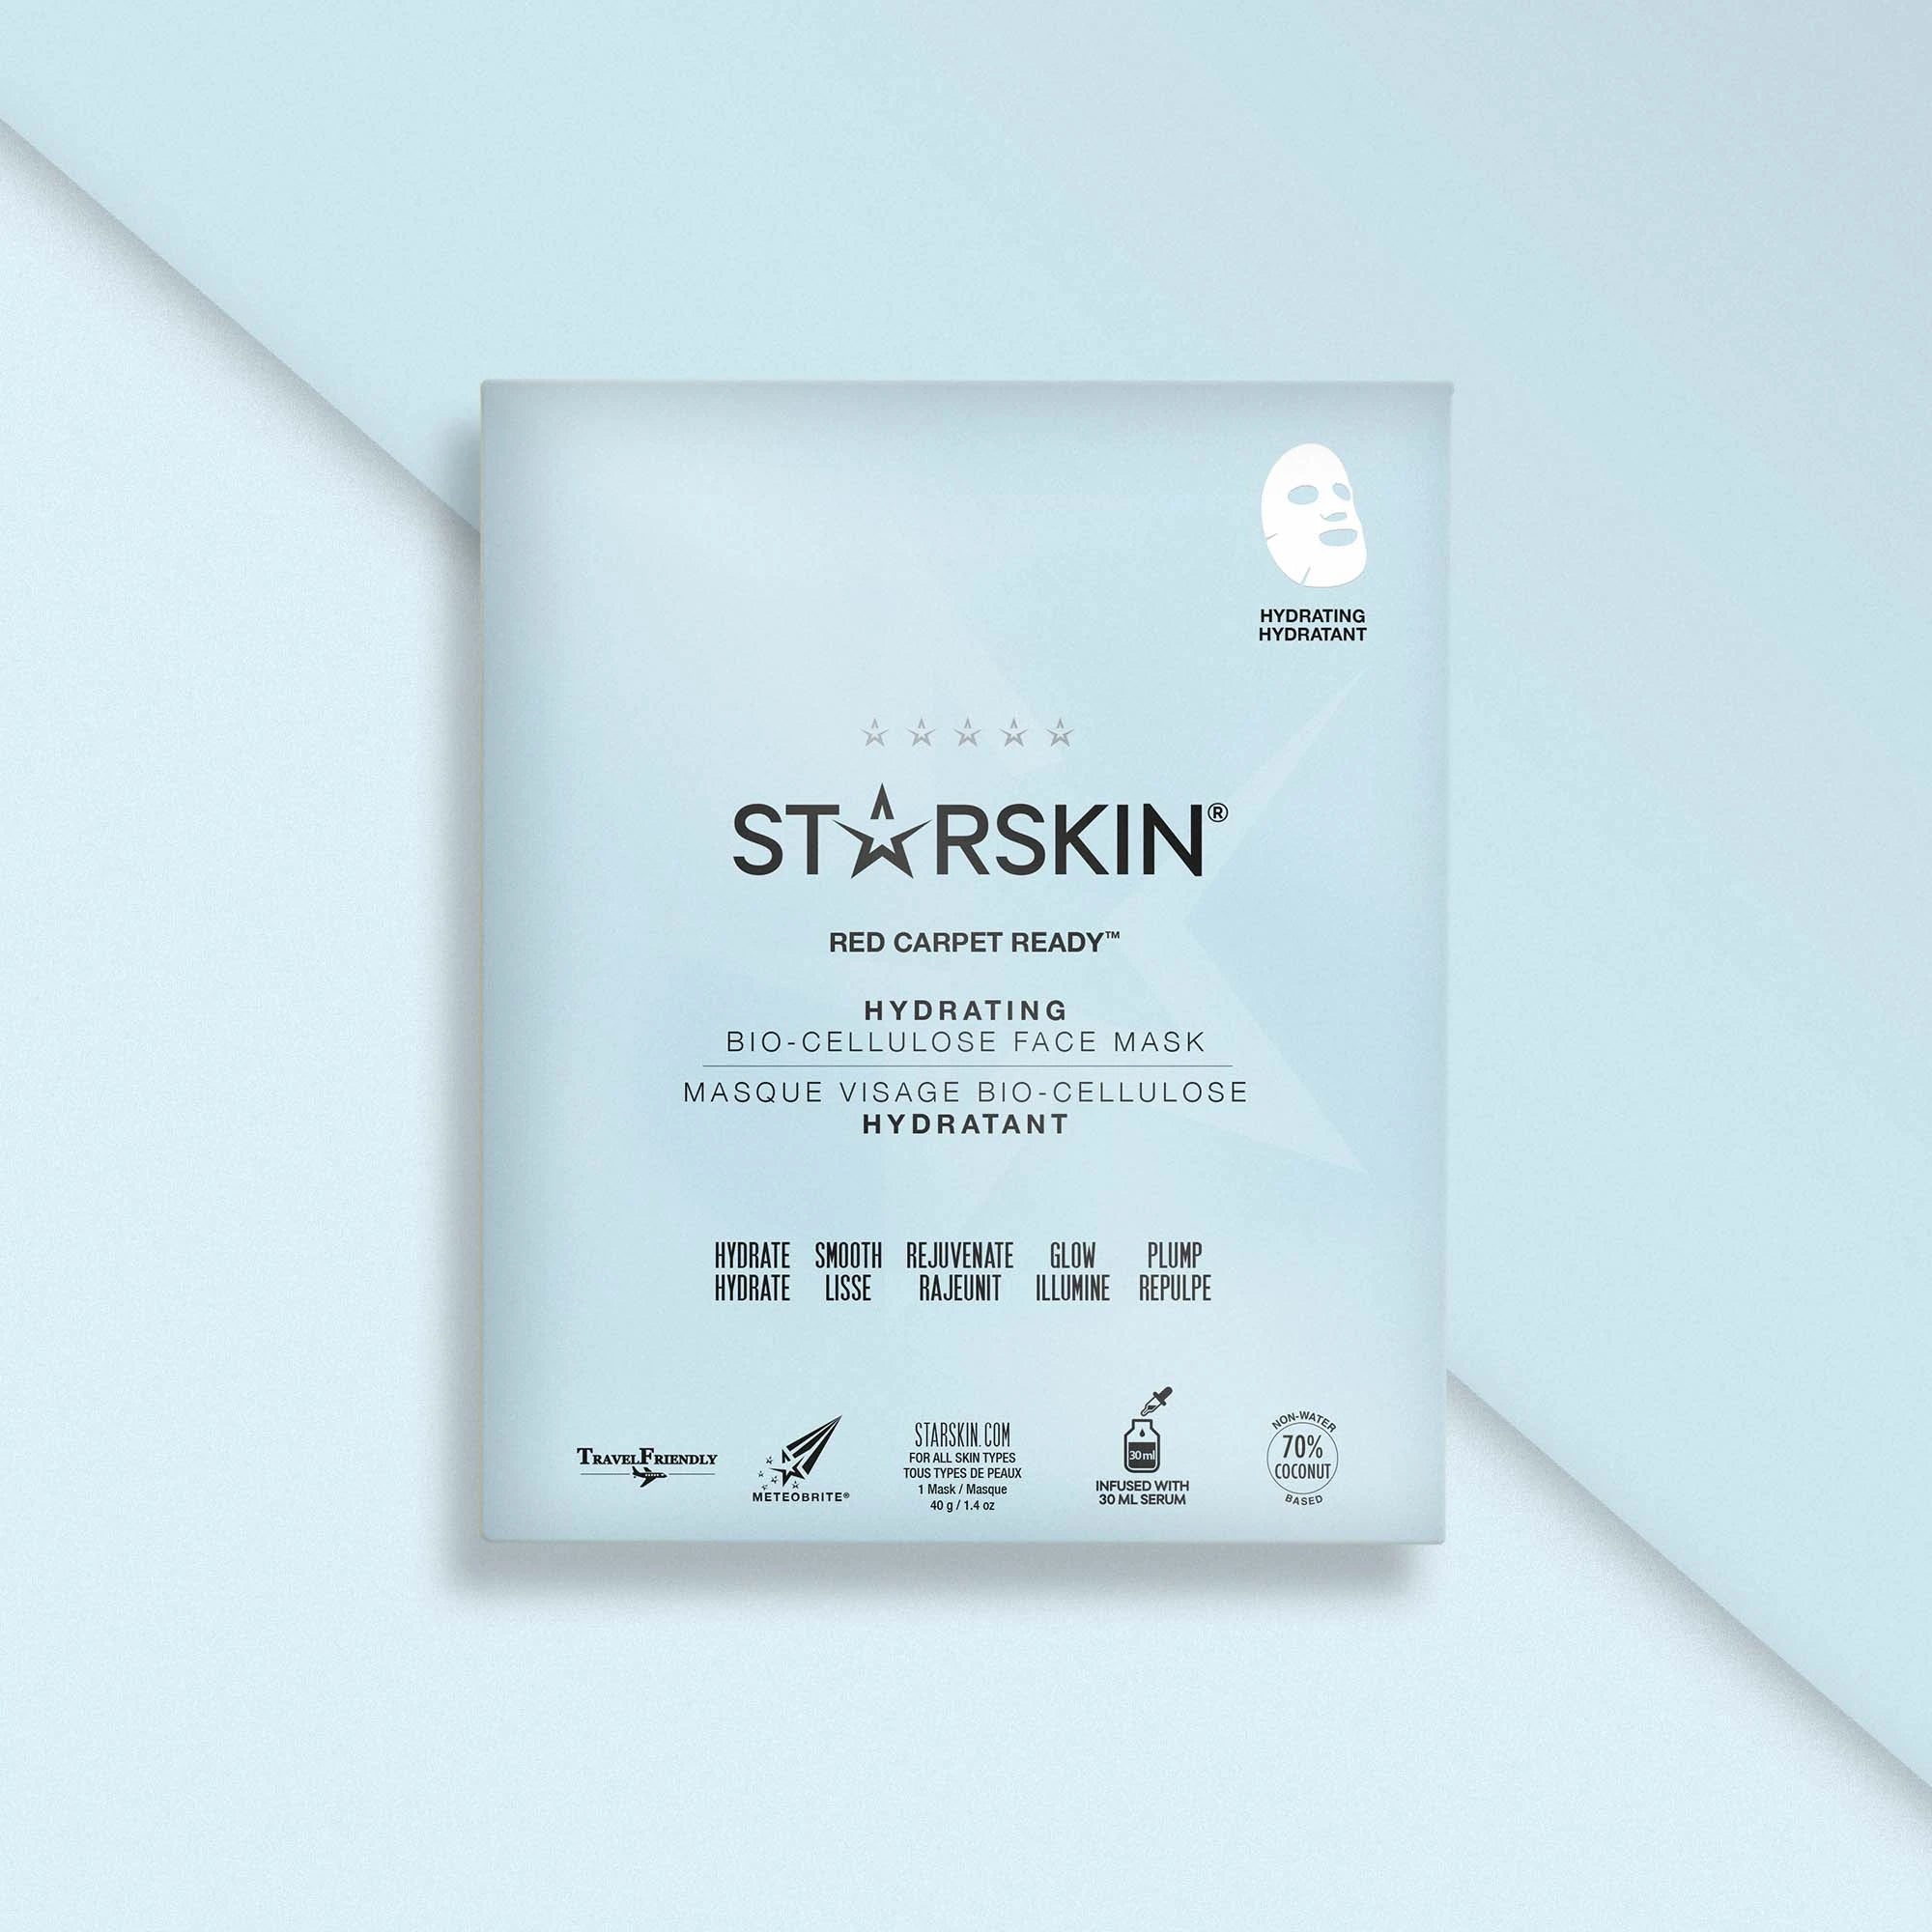 Starskin Red Carpet ready face mask being showcased on a blue background